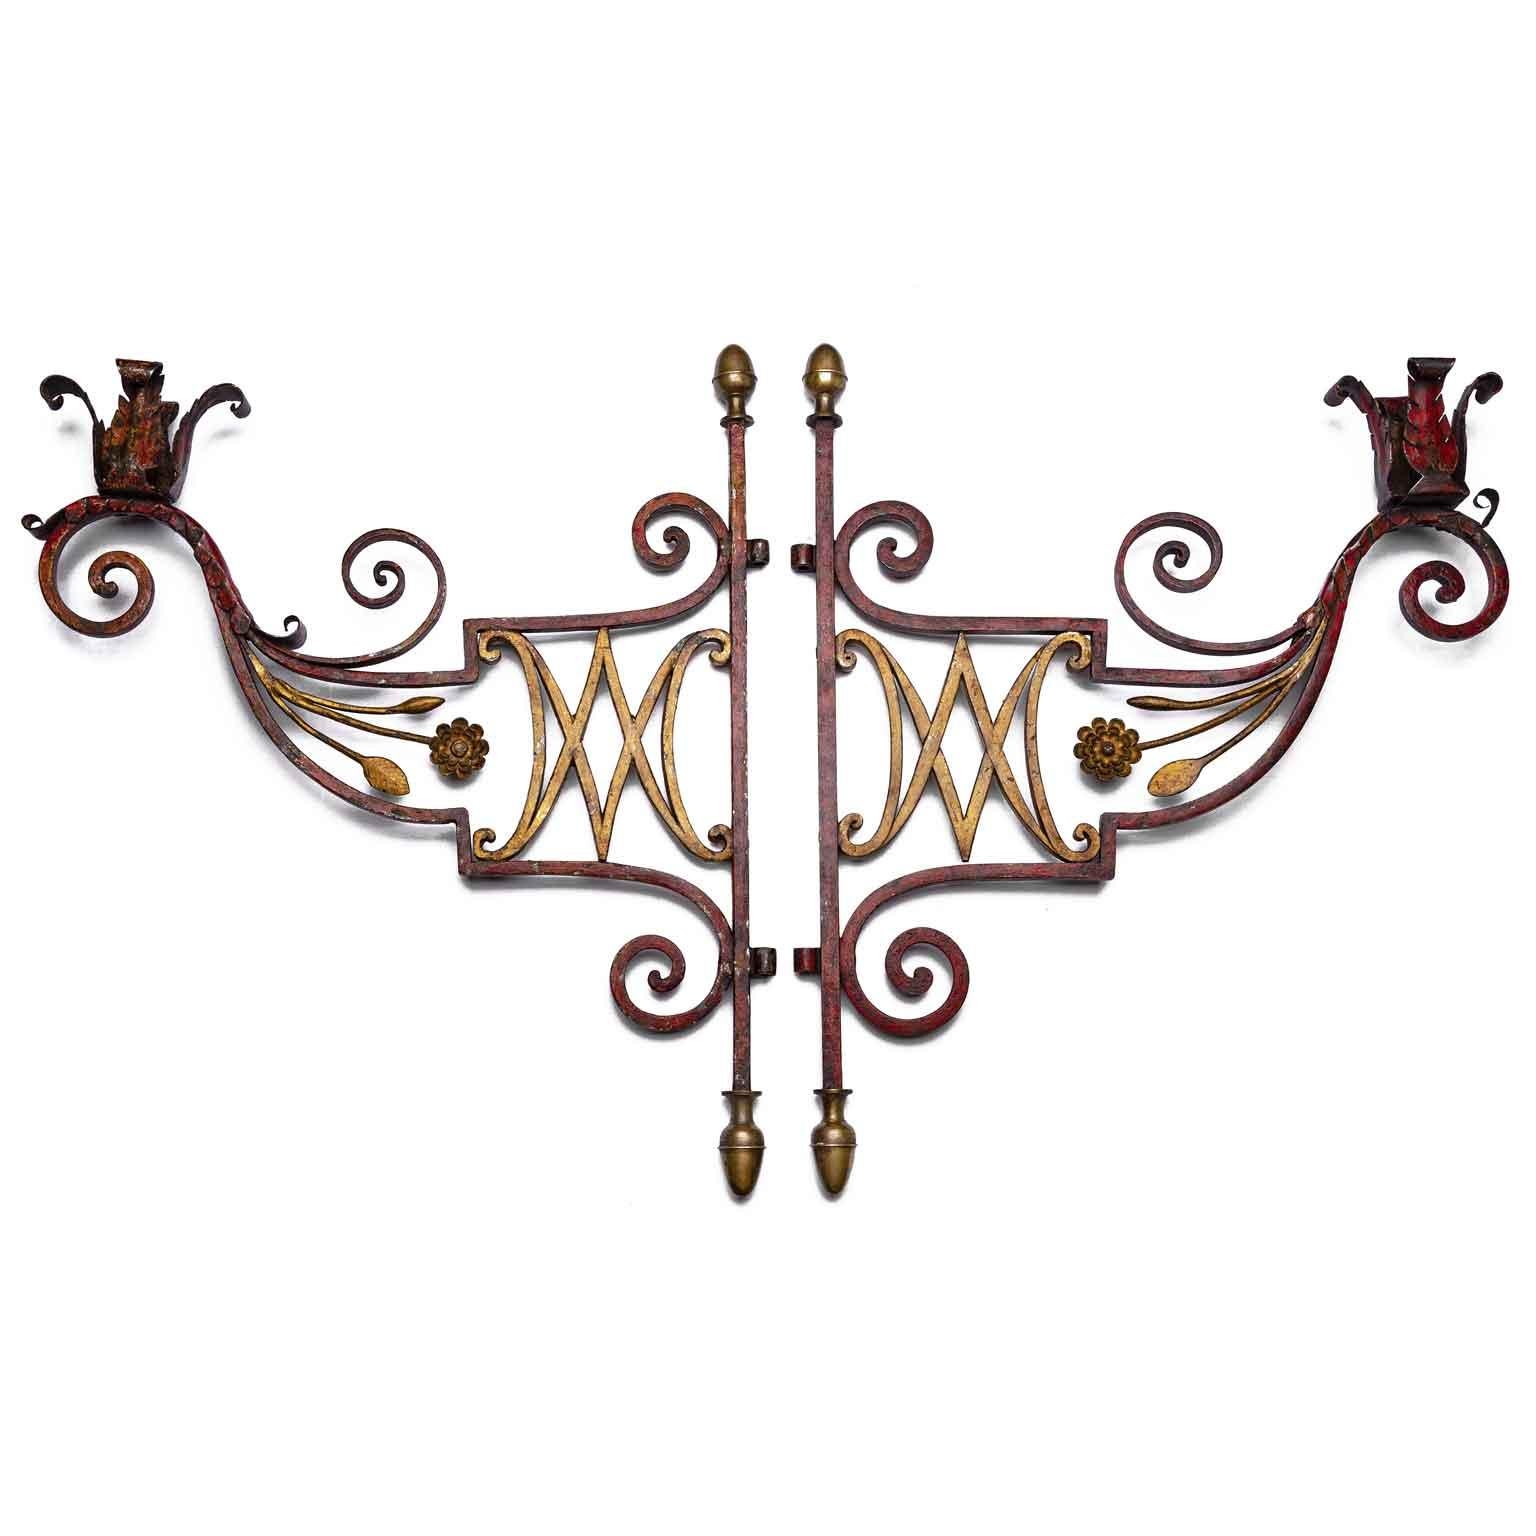 From an Italian Castle, a stunning pair of 18th gilt and red wrought iron large wall candle holders brackets. They come from a castle near Treviso, Veneto region, in Northern Italy and are in good age related condition.

We found them with a